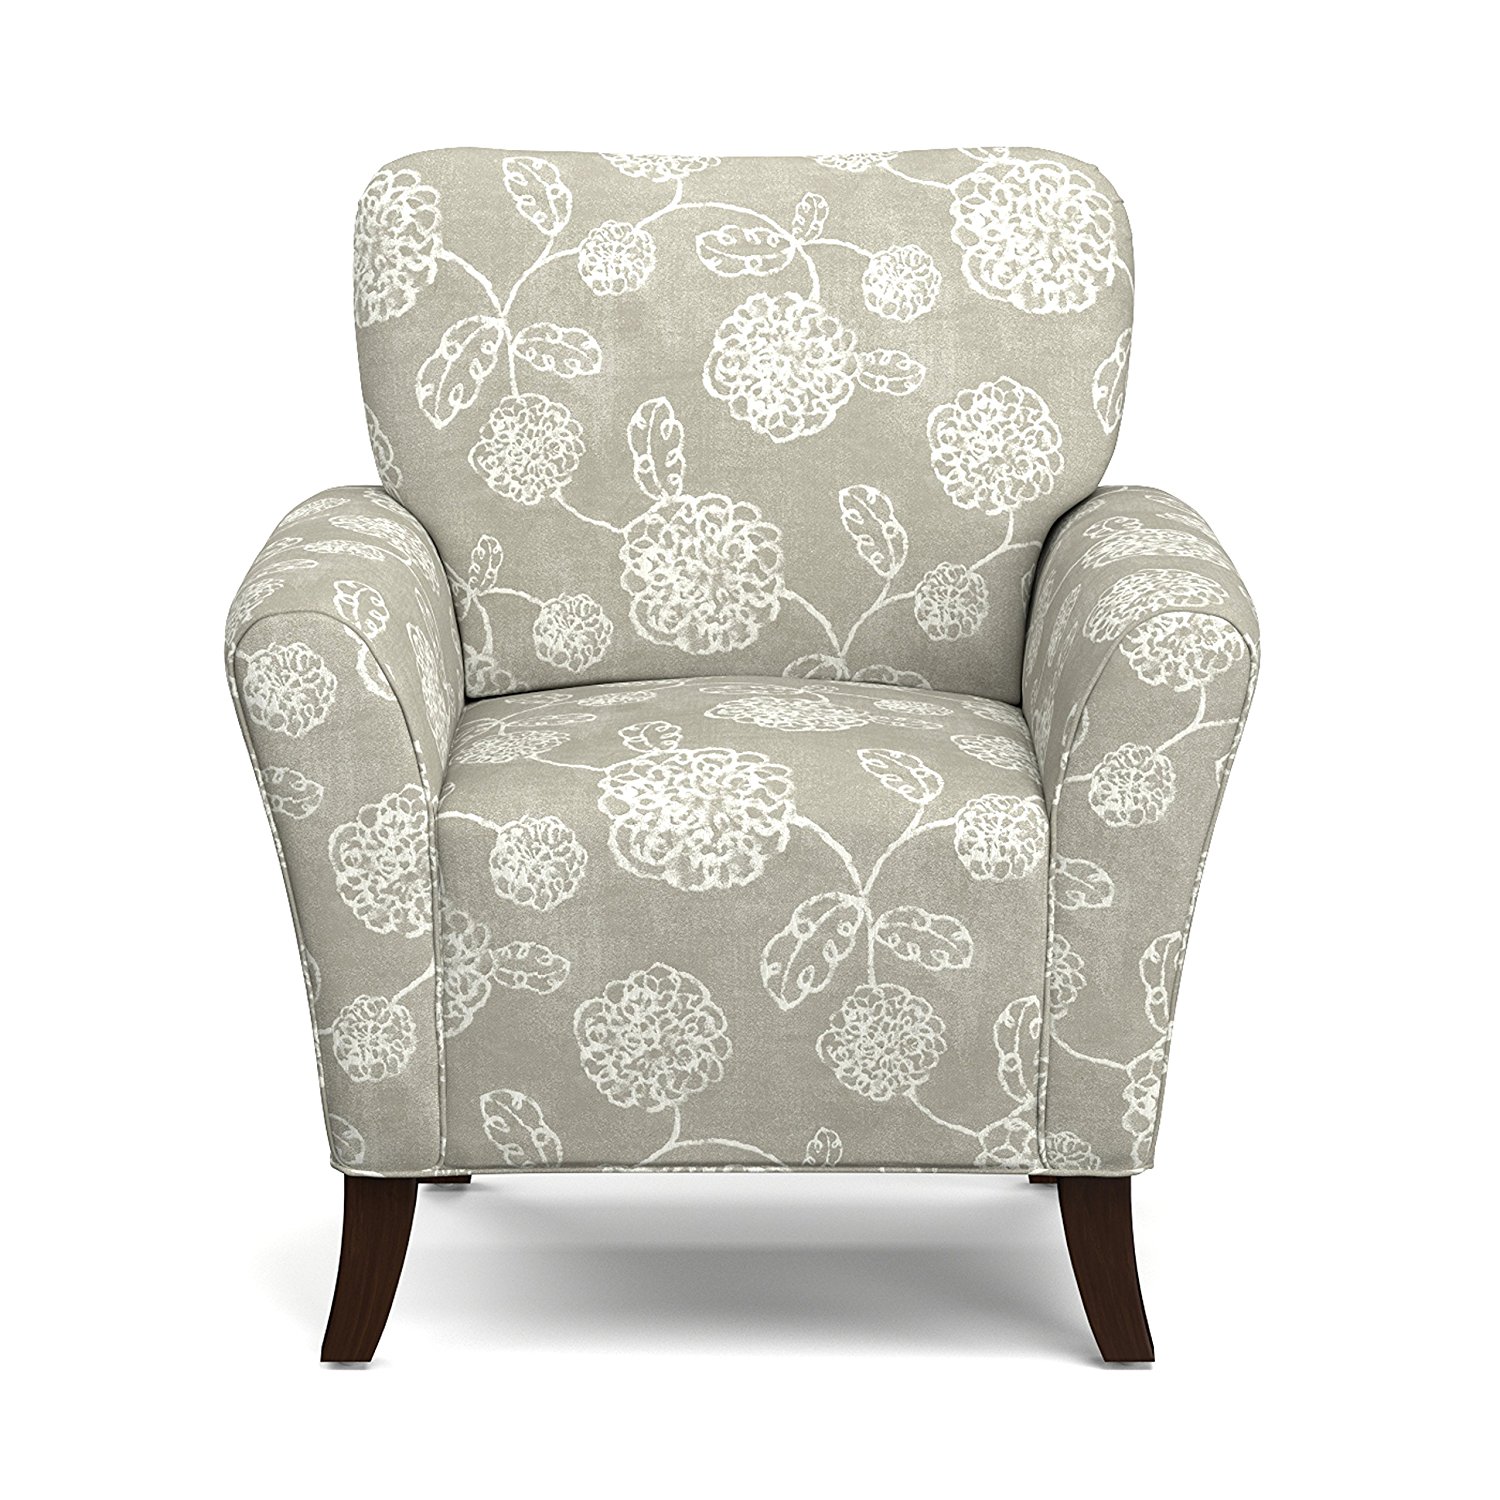 Upholstered Living Room Chairs - Decor Ideas